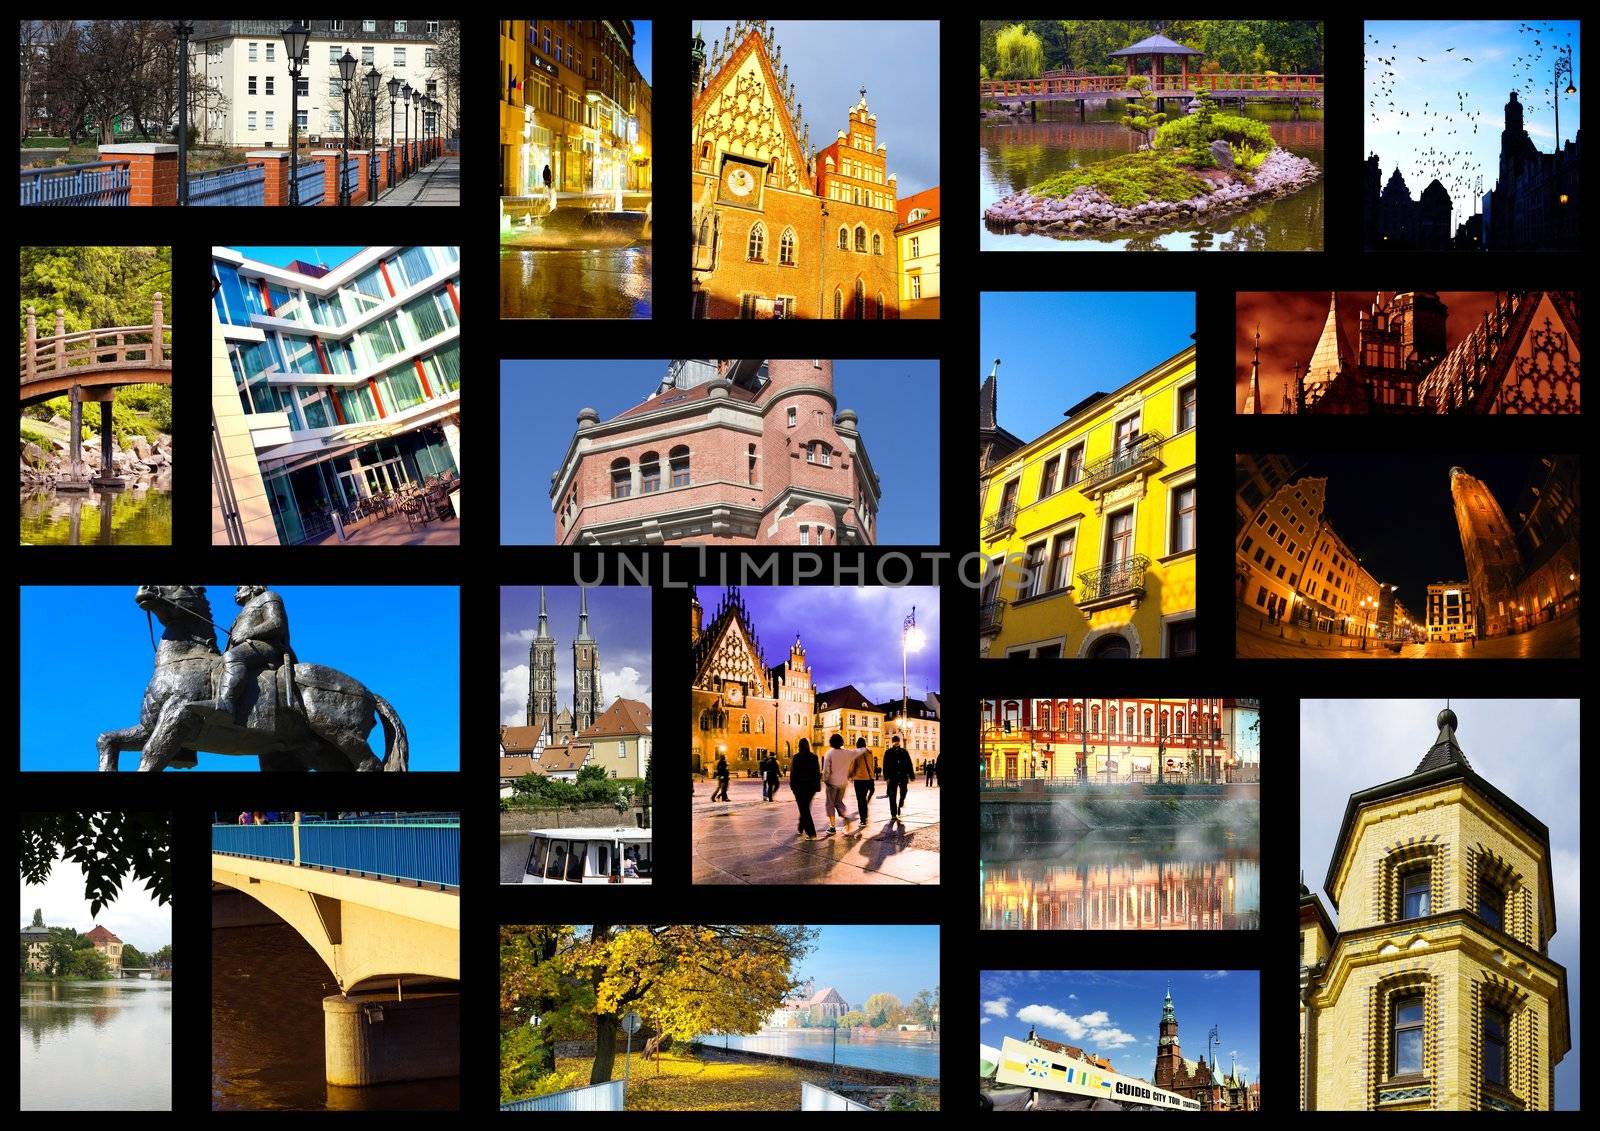 European city in collage- Wroclaw/Poland/